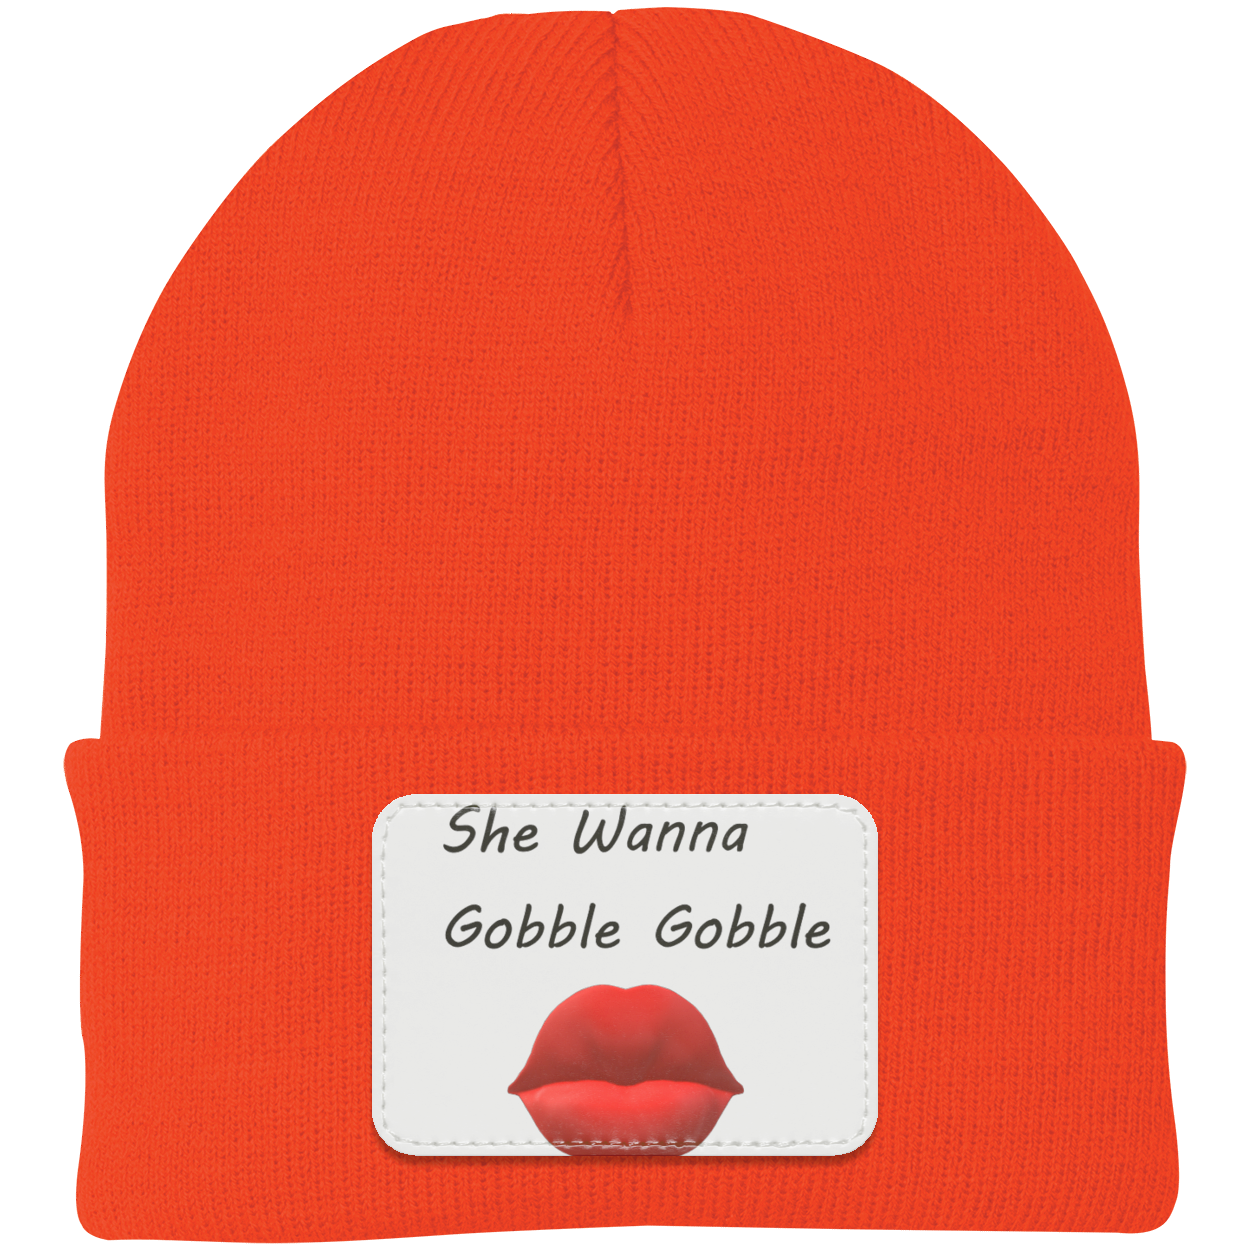 She wanna gobble gobble Knit Cap - Patch